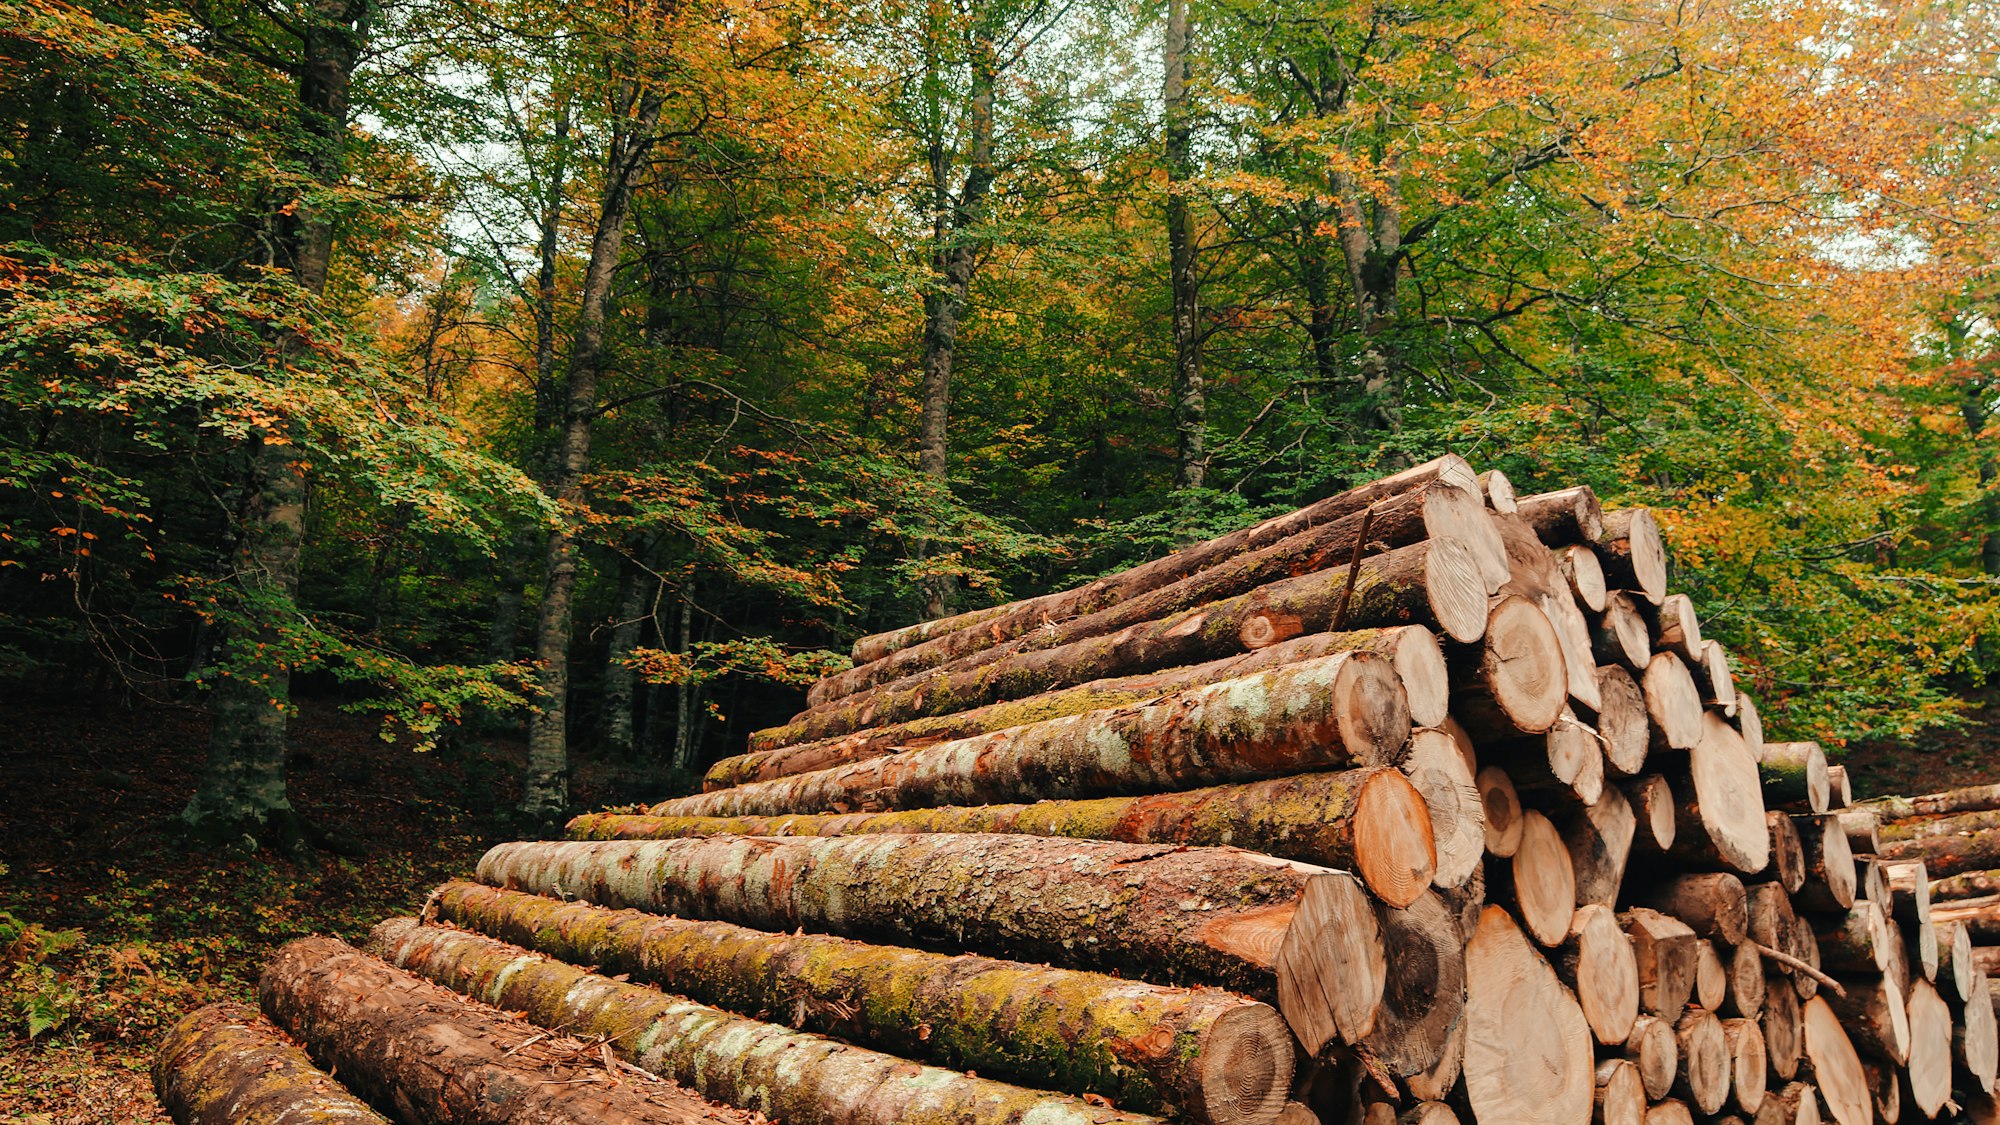 Wooden Logs Stacked In The Woods